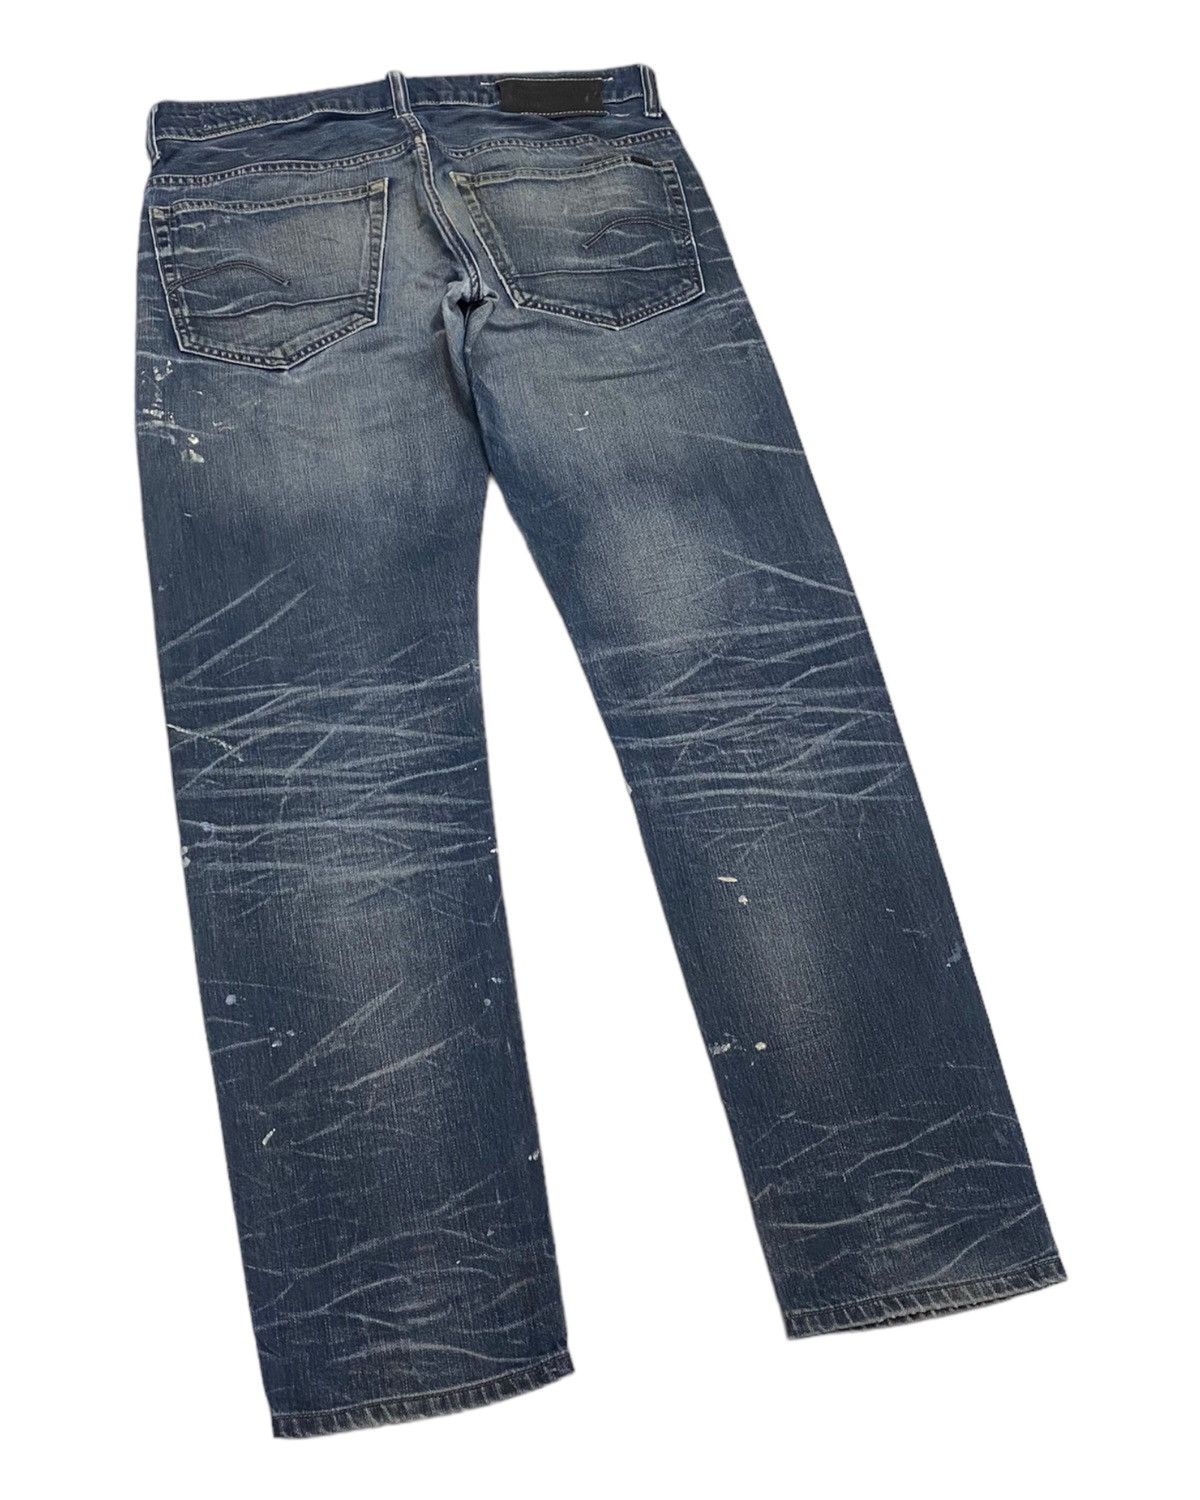 Archival Clothing - G-STAR RAW DISTRESSED PAINTED 3301 UNDERCOVER STYLE JEANS - 8